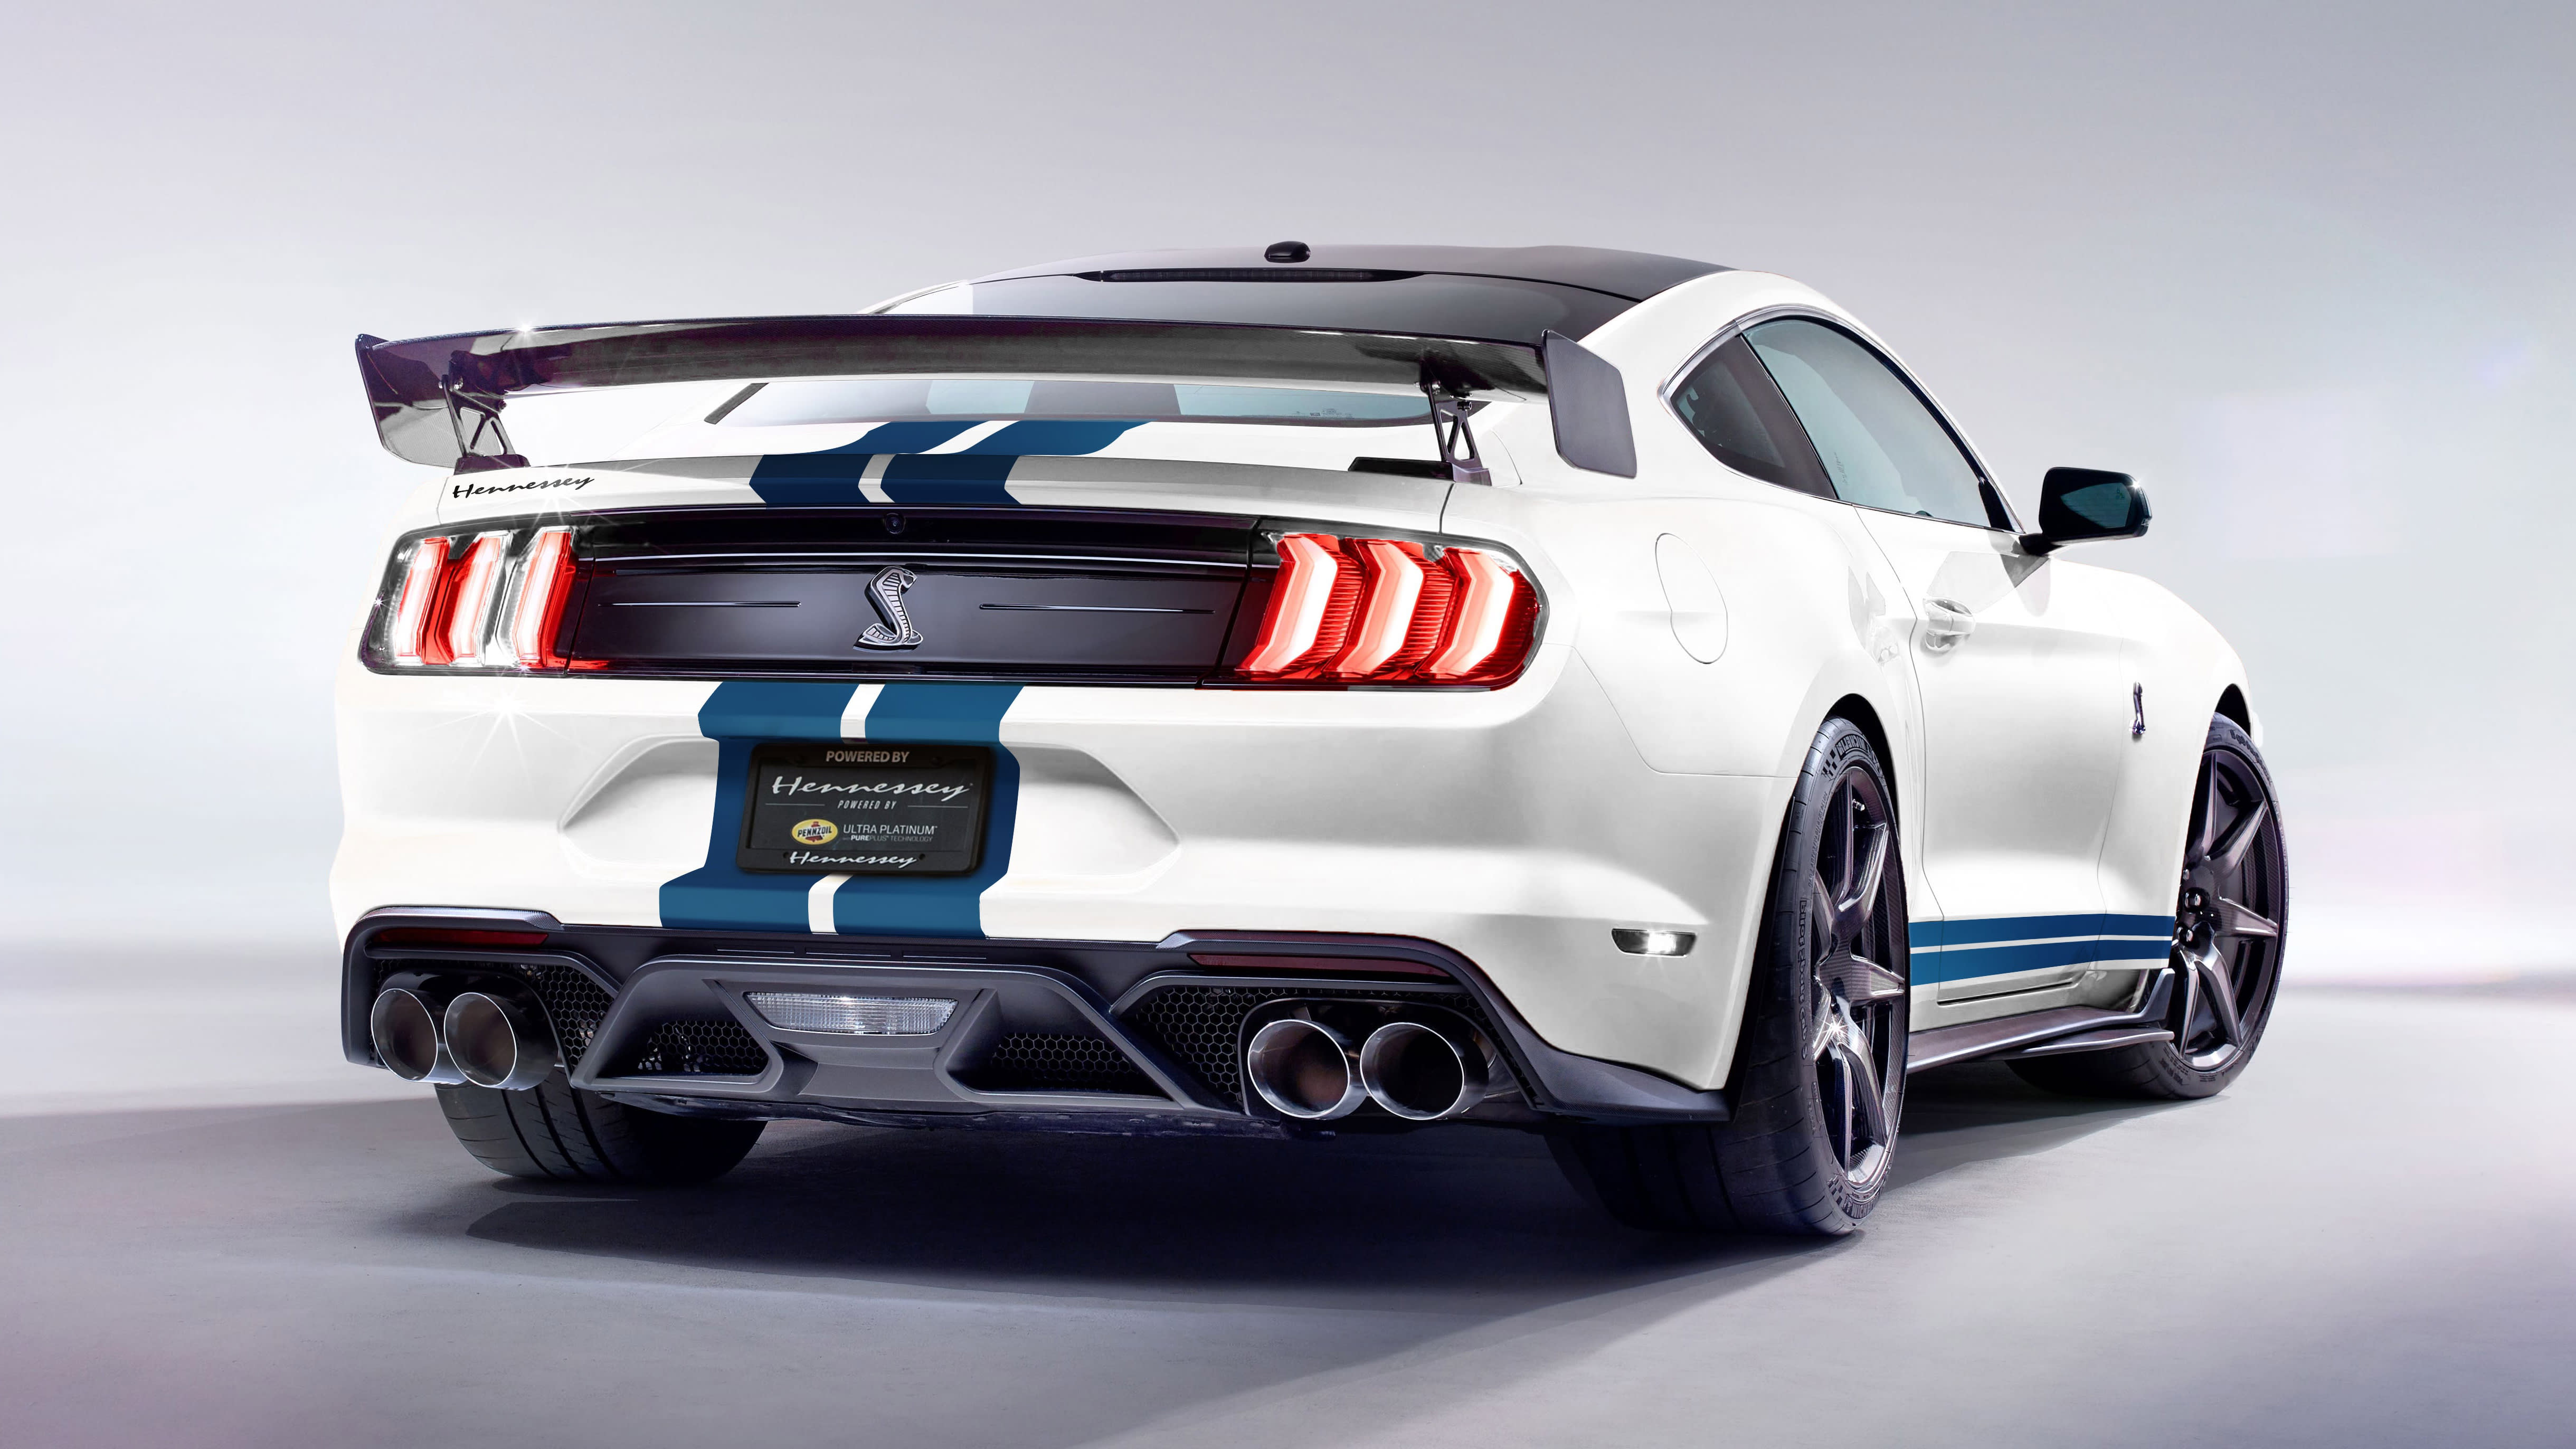 Ford Mustang Shelby Gt500 Hp